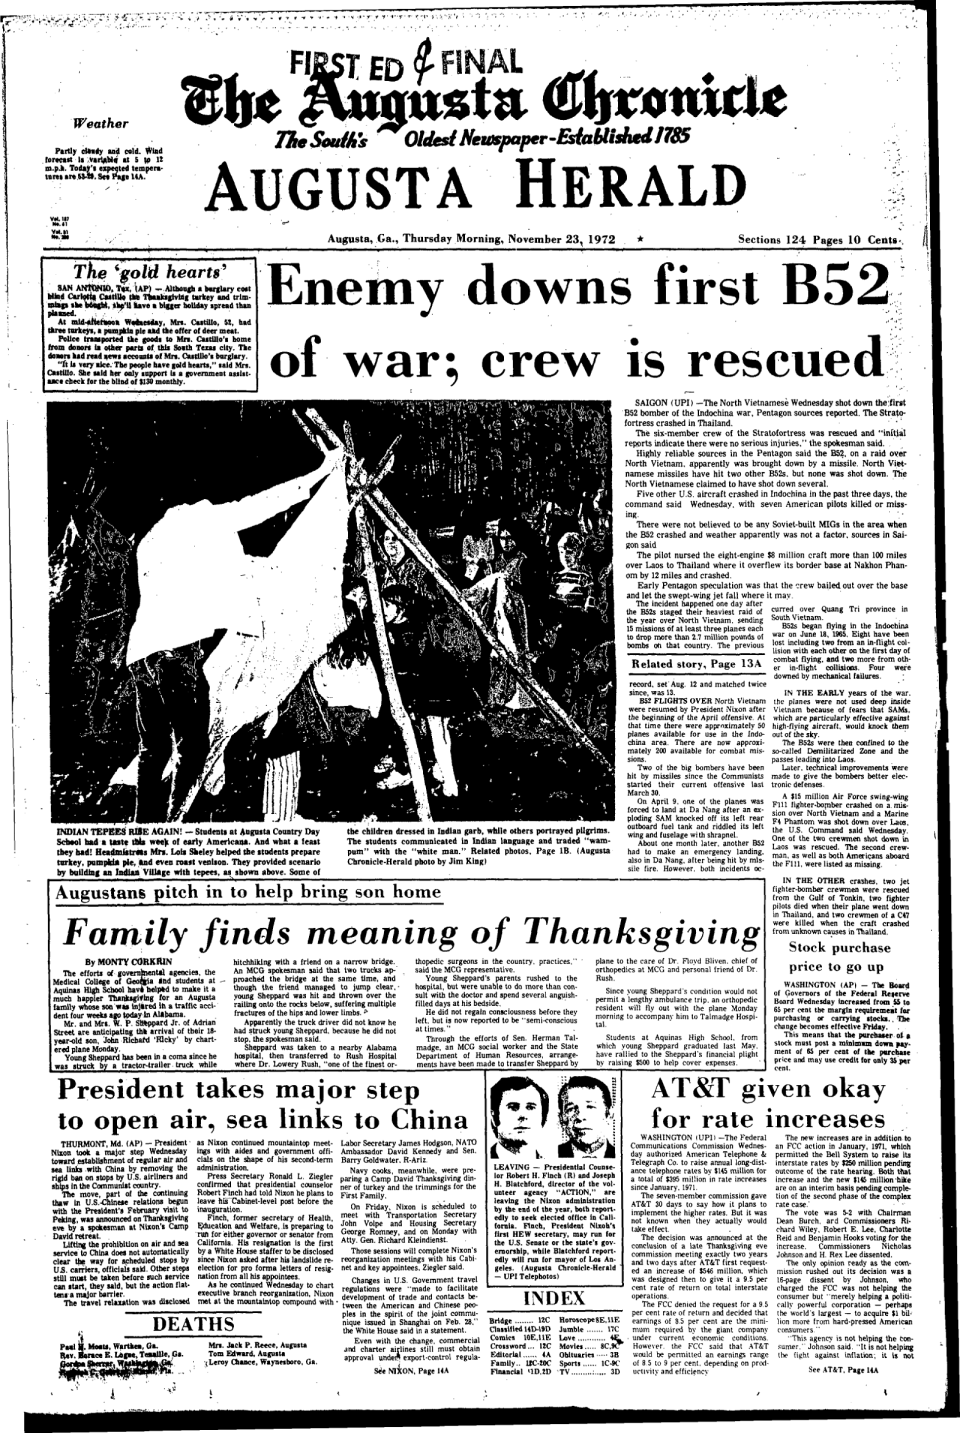 The front page of the Augusta Chronicle on Thanksgiving on November 23, 1972.